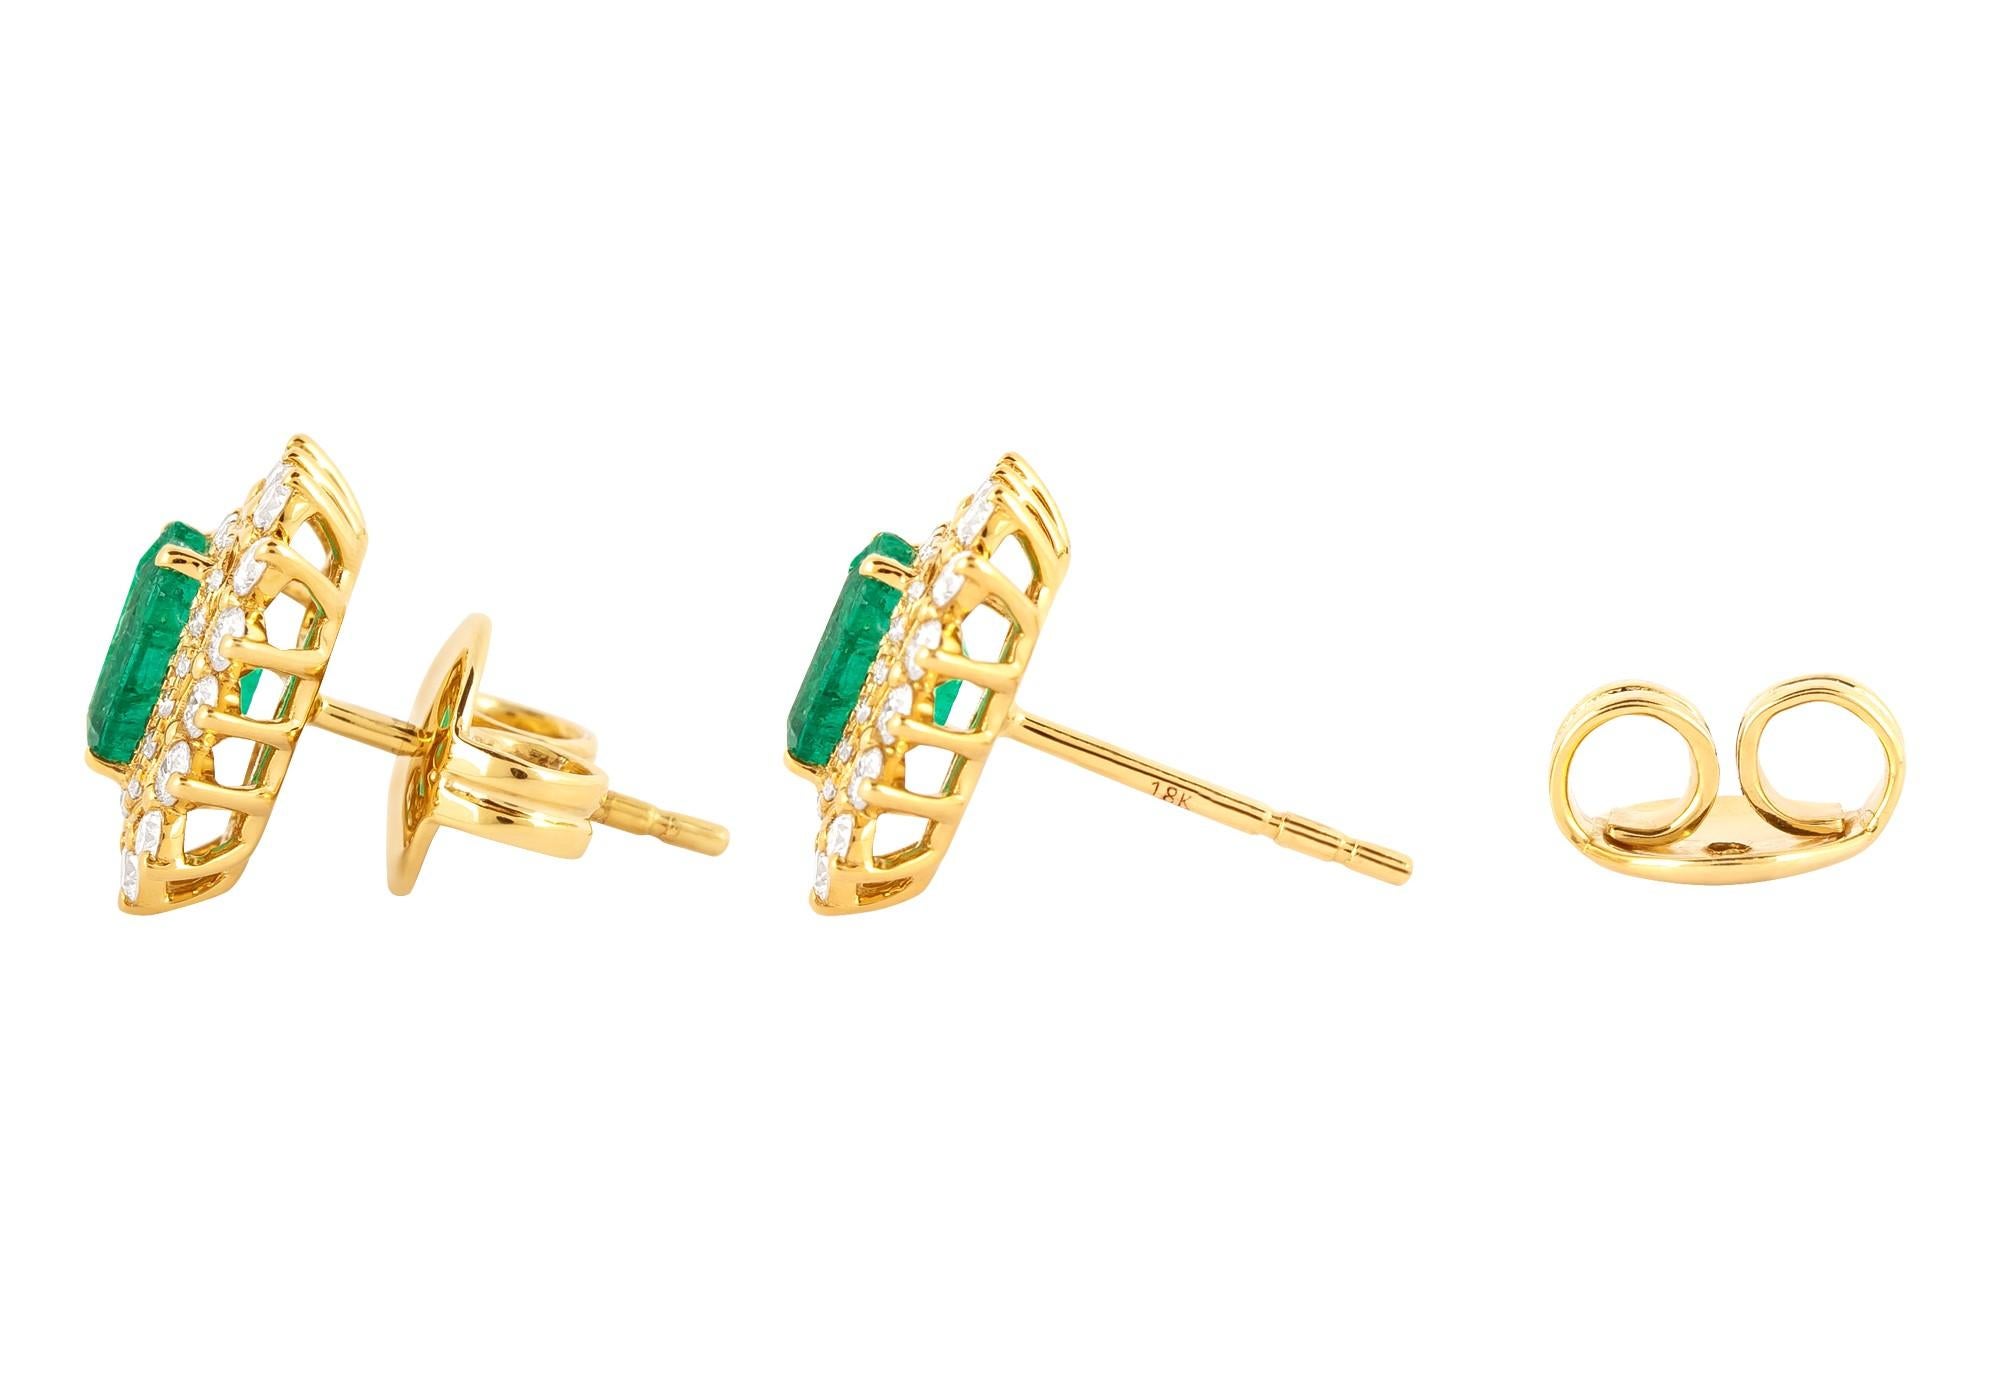 18 Karat Gold 1.96 Carat Diamond and Emerald Solitaire Cocktail Stud Earrings For Sale 1